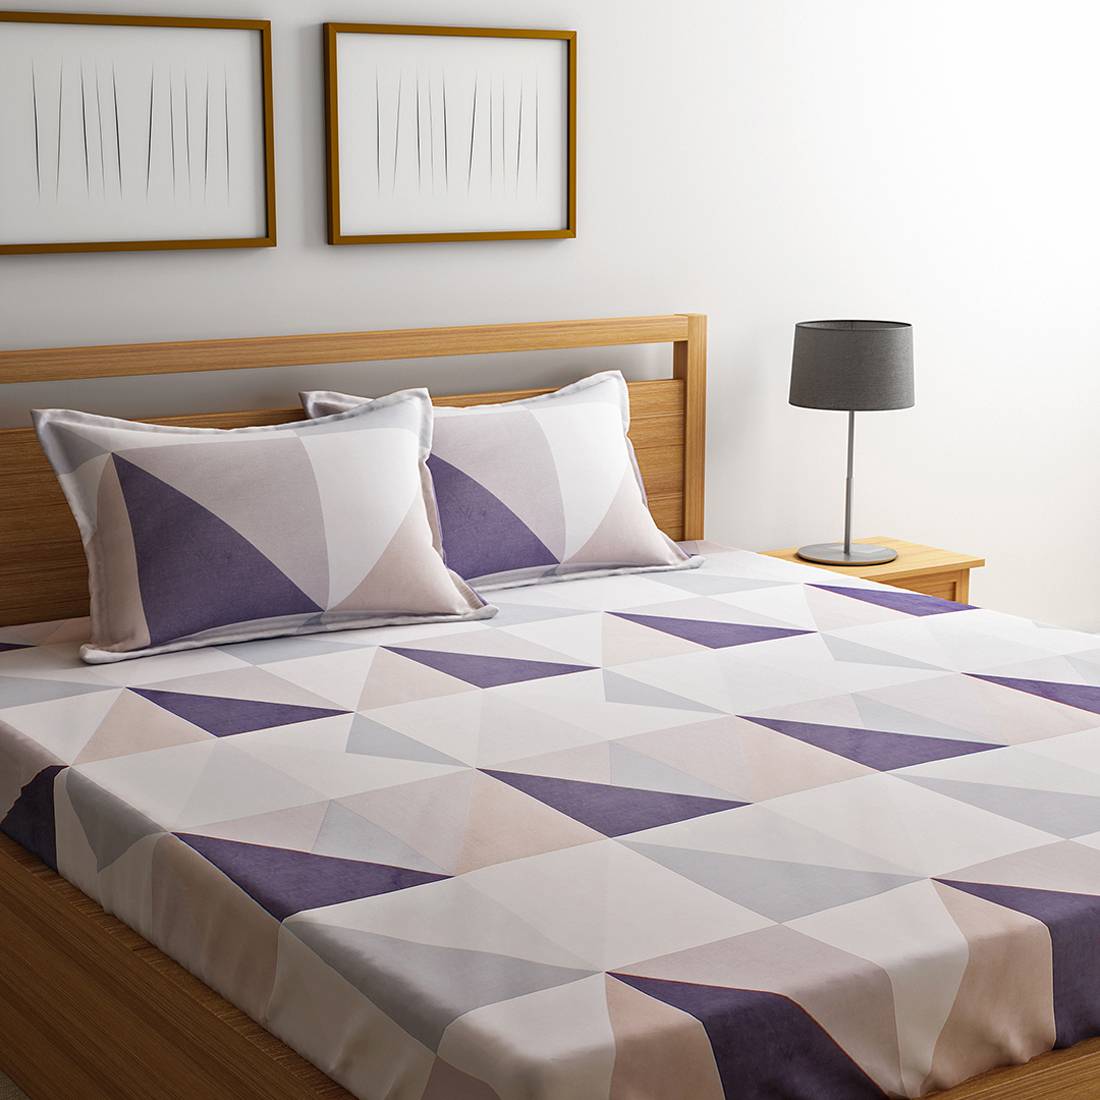 Favorite Places to buy bed sheets and linen in Australia